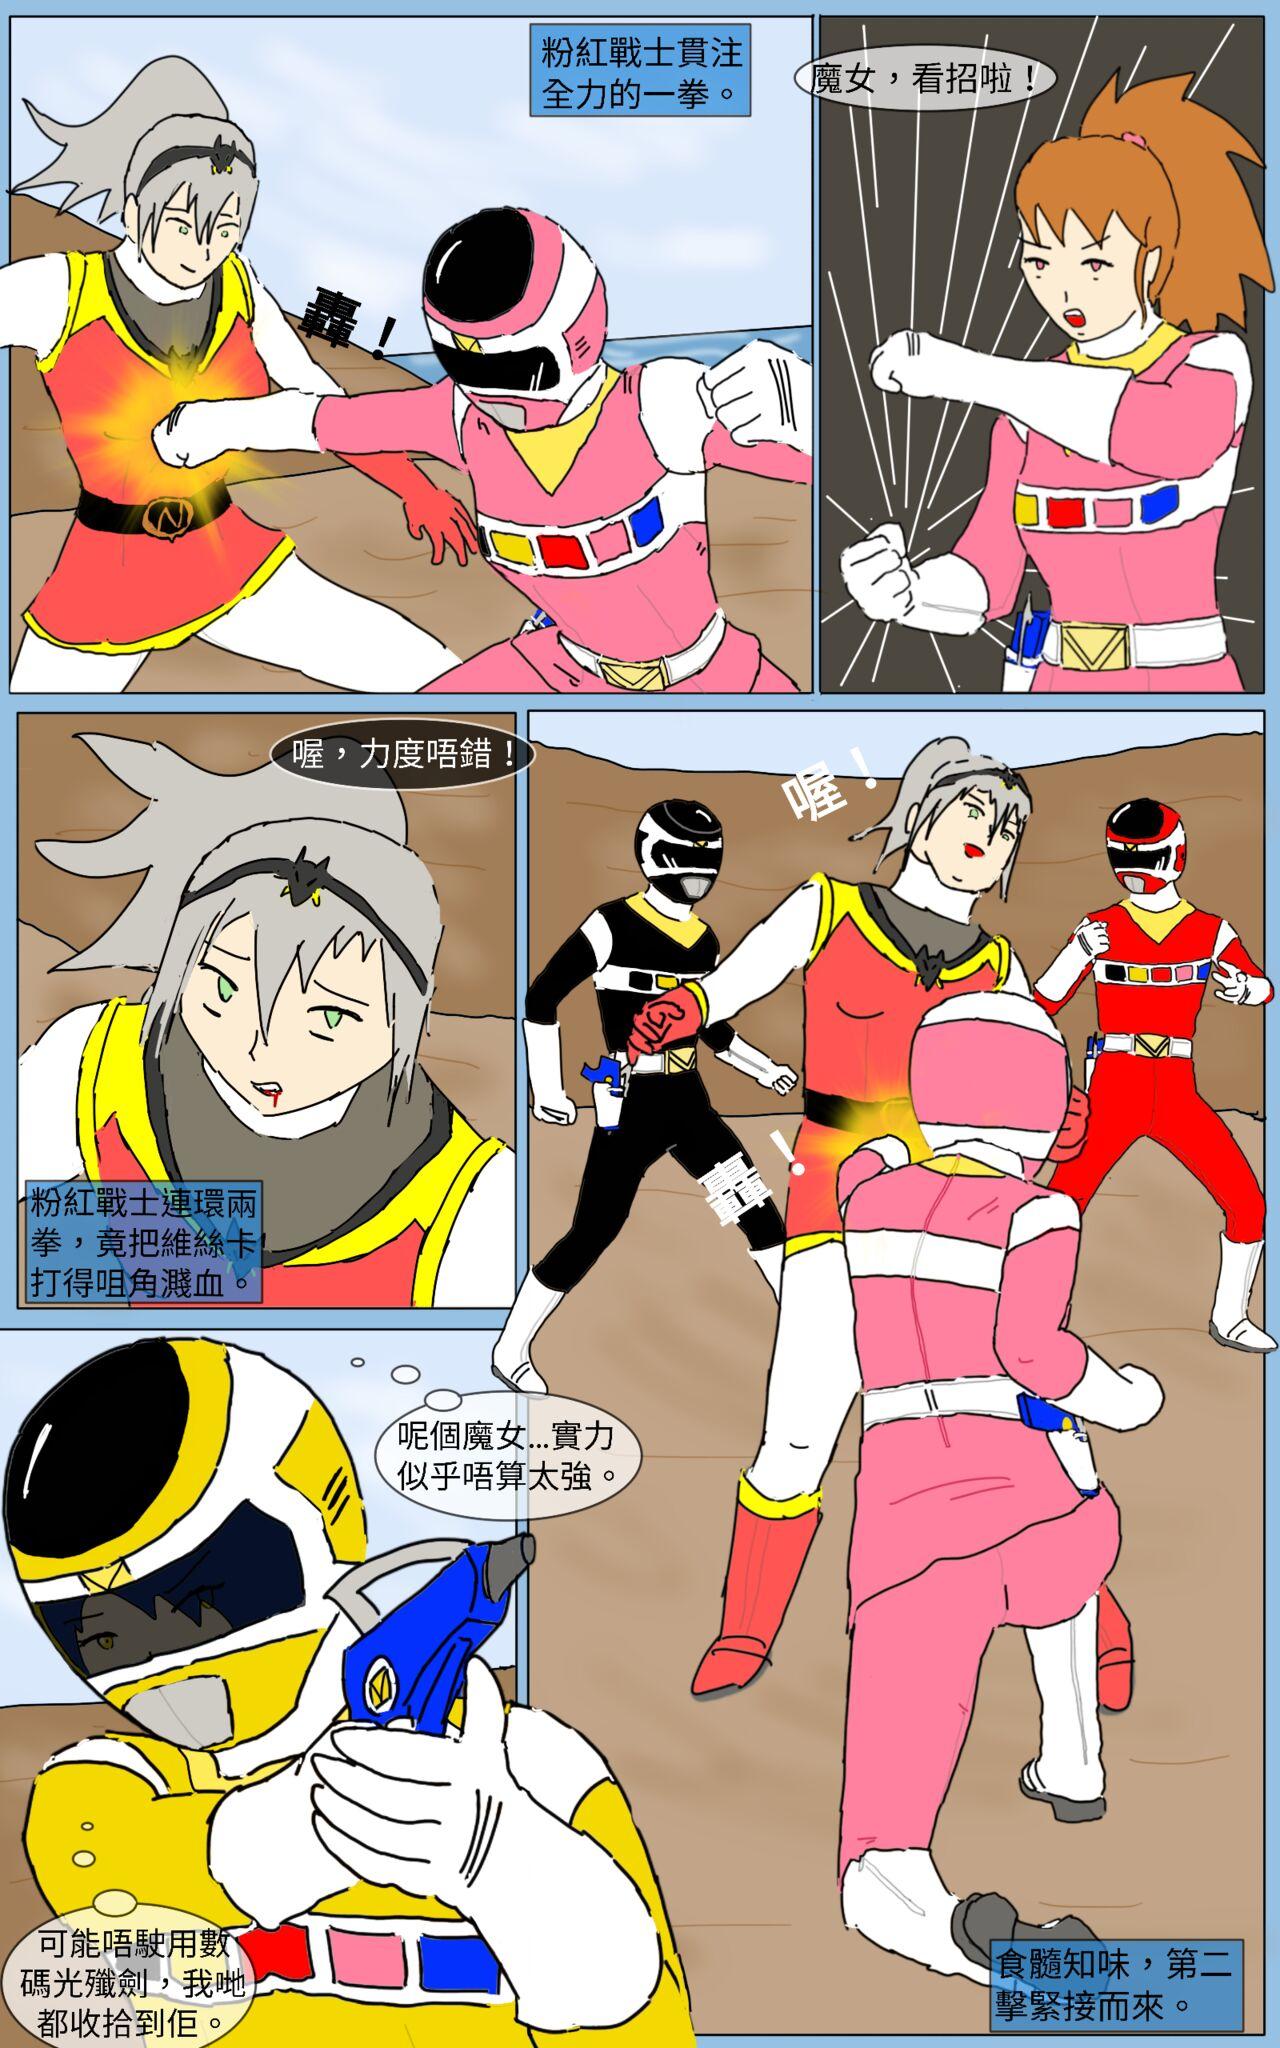 Tied Mission 16 - Super sentai High Heels - Page 10